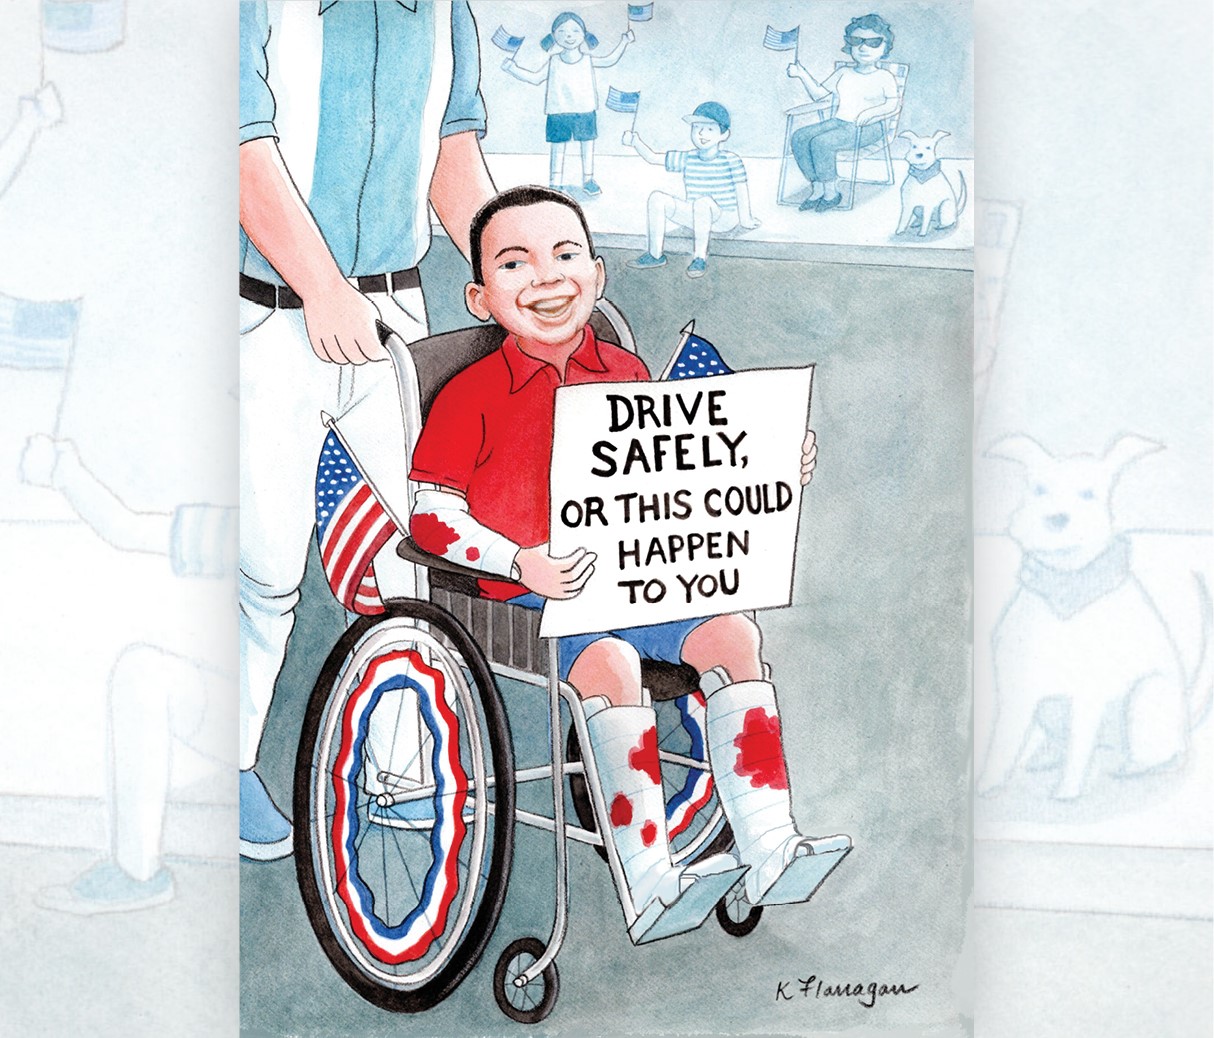 An illustration of Dr. Winer as a child in a wheelchair on July 4.